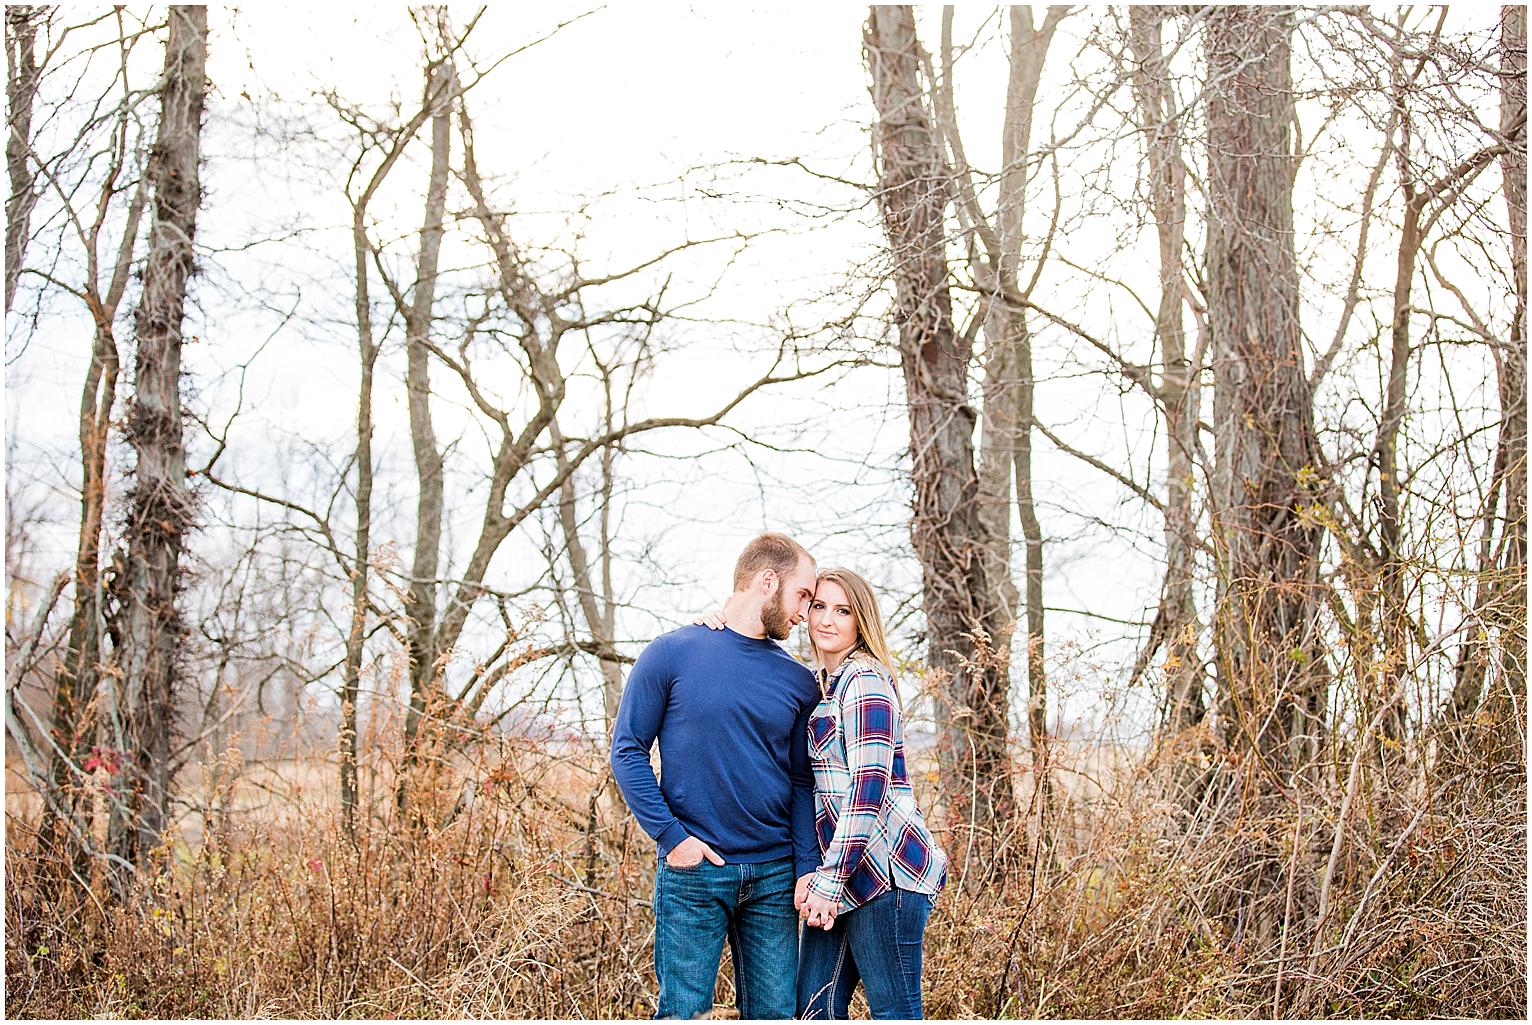 FAVORITES OF 2015 | WEDDING + ENGAGEMENTS + COUPLES » My great ...